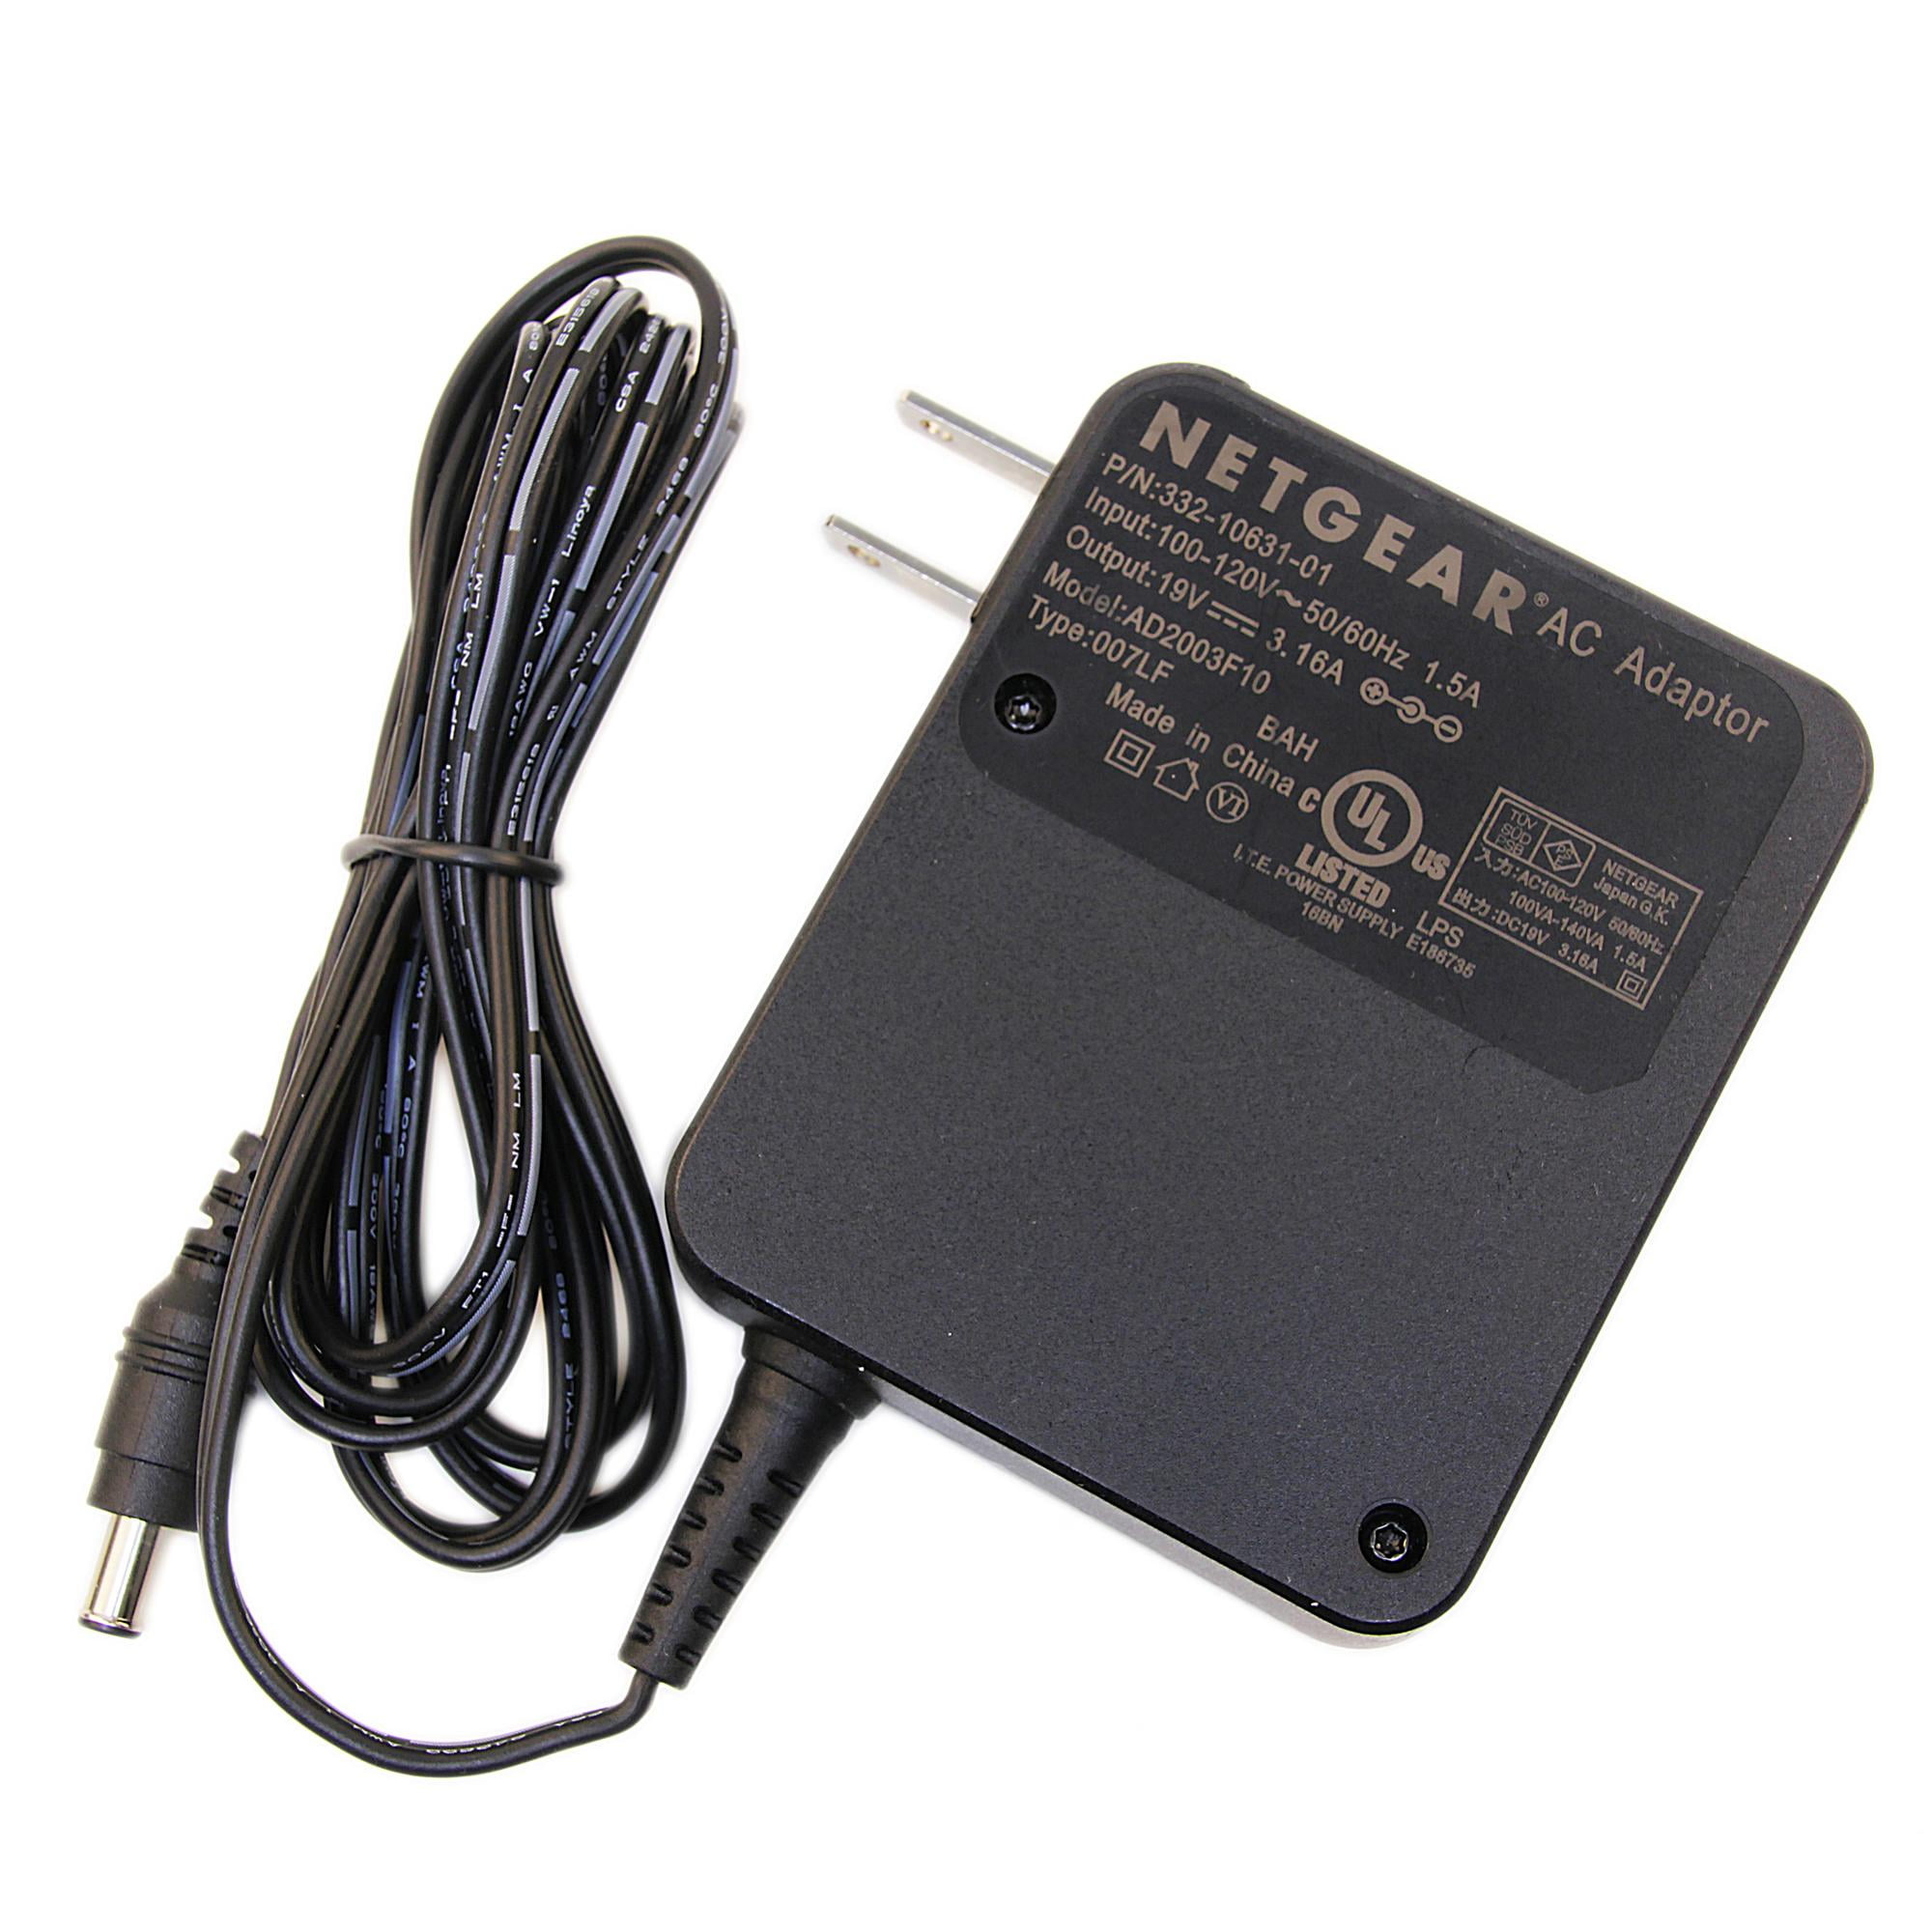 R6080 WIFI Router 12V Power Supply UL AC Adapter For NETGEAR R6020 